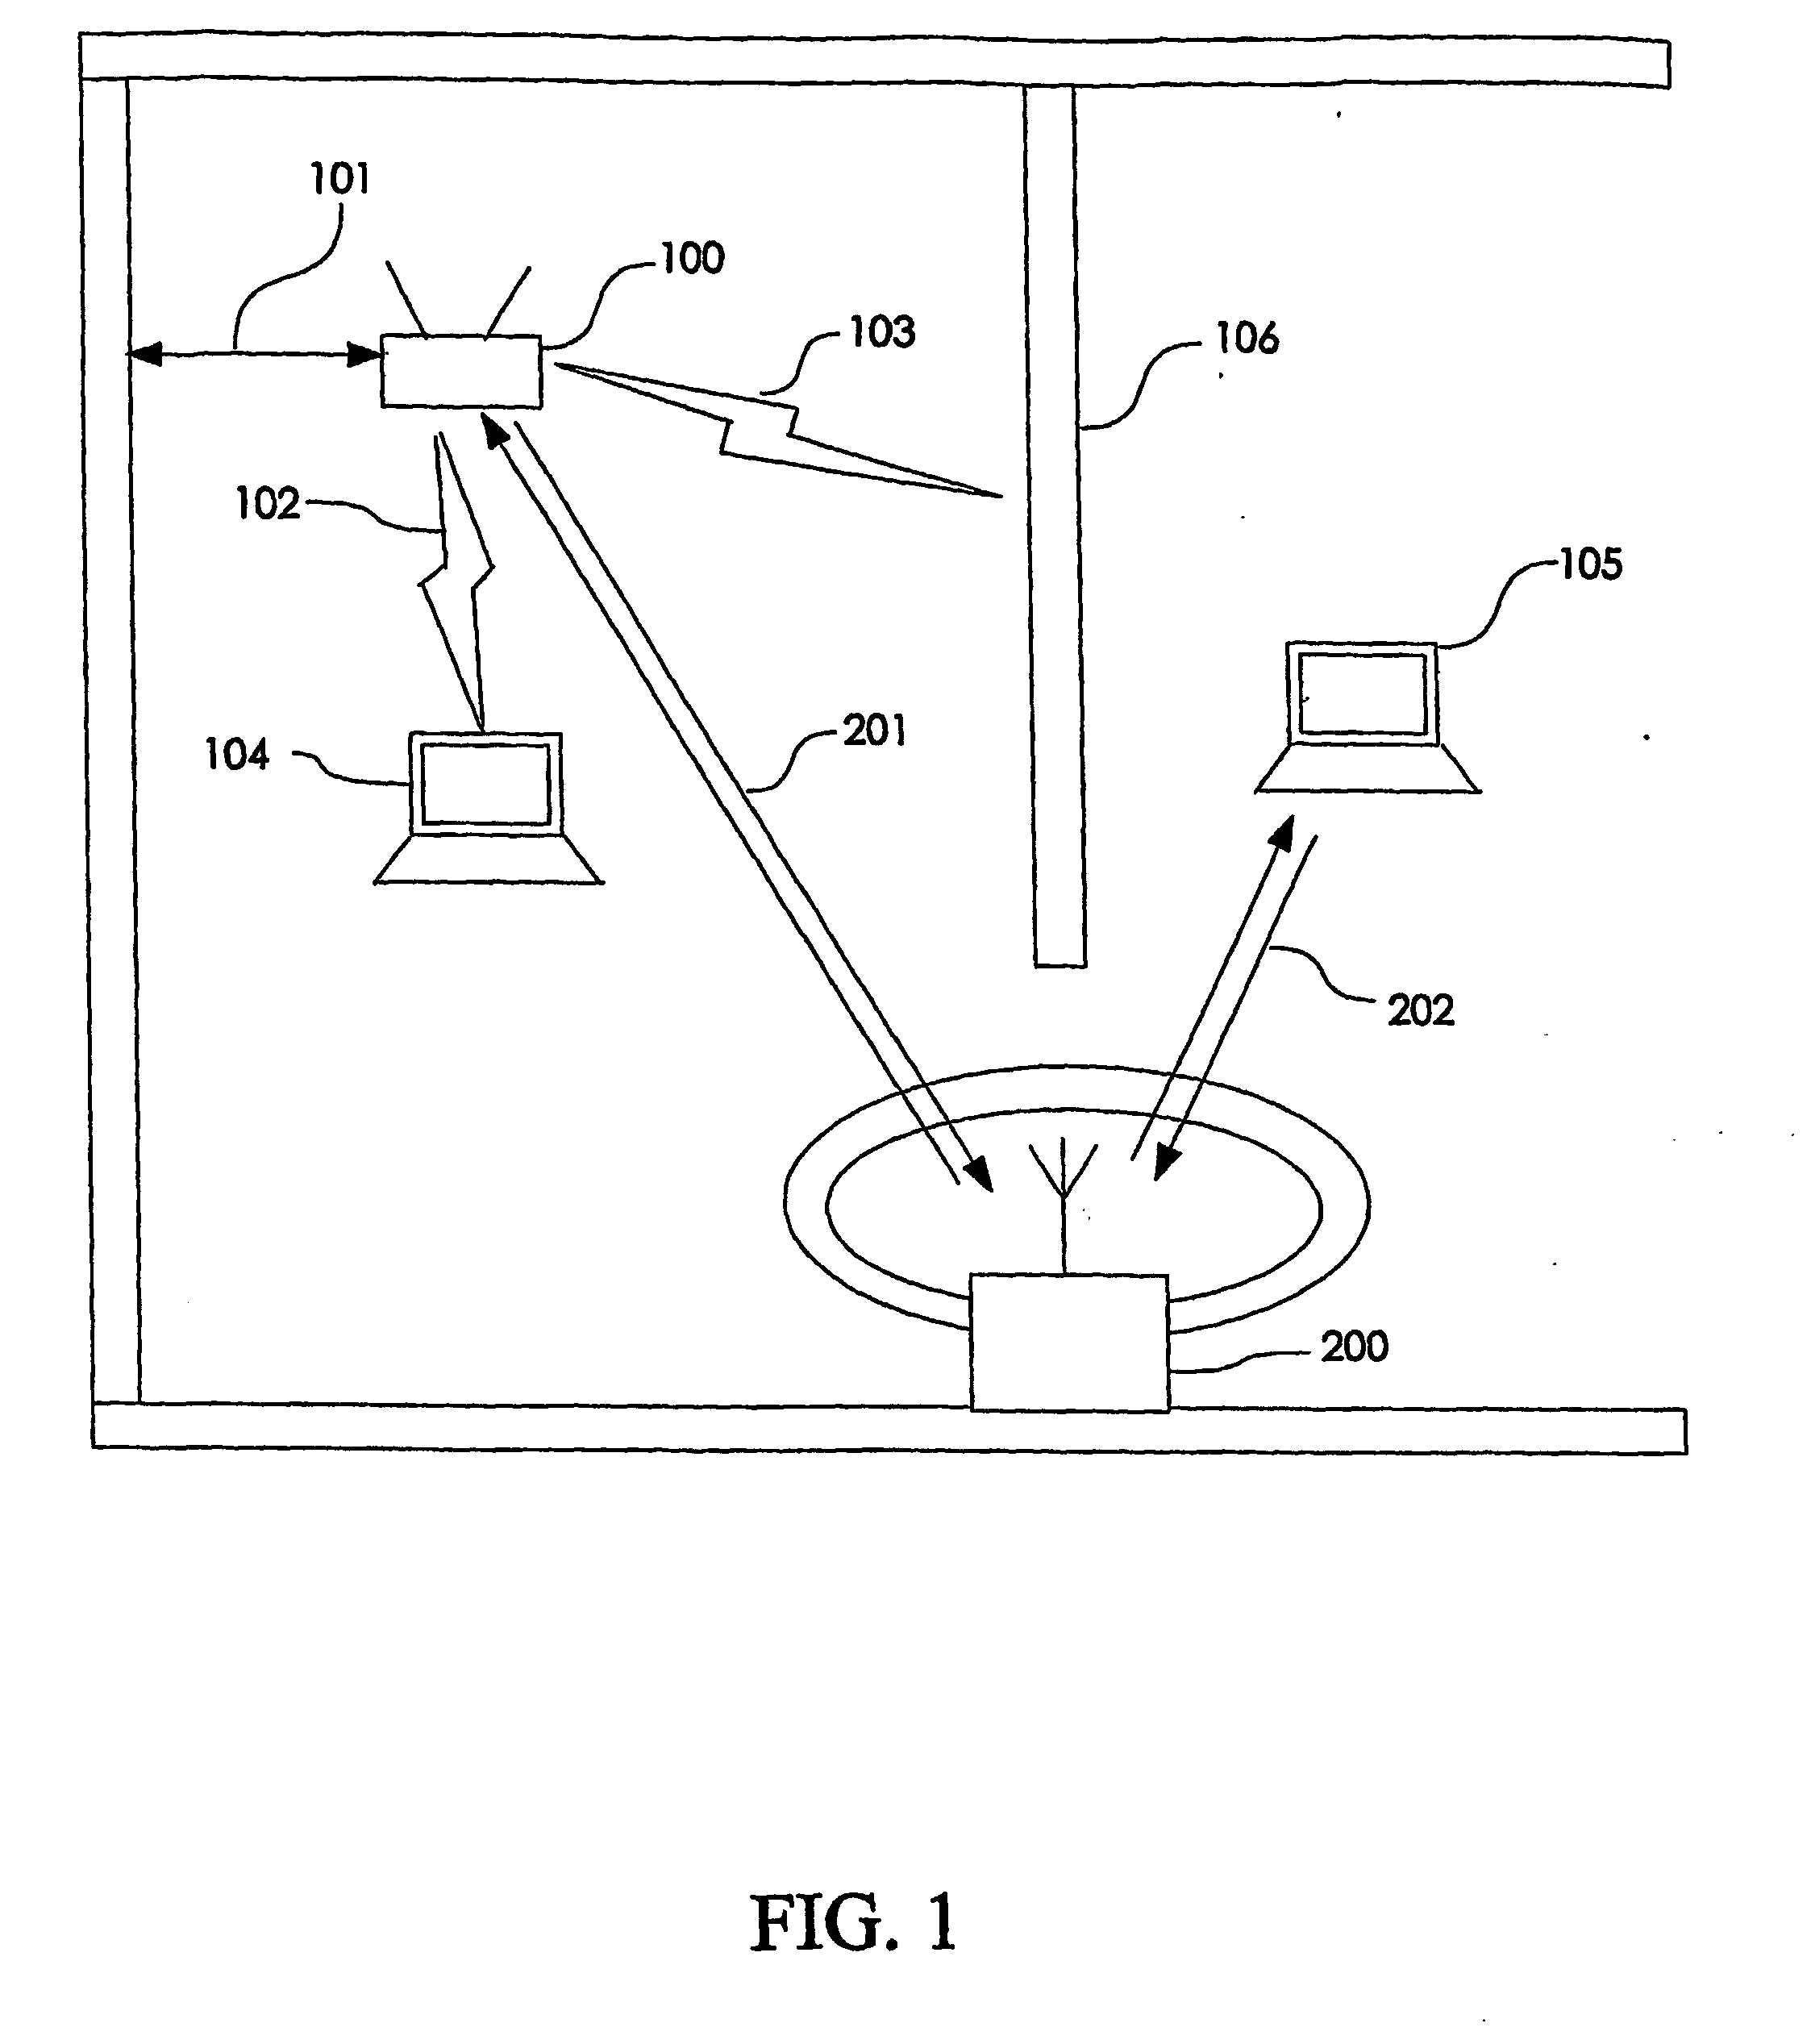 Wireless local area network repeater with in-band control channel